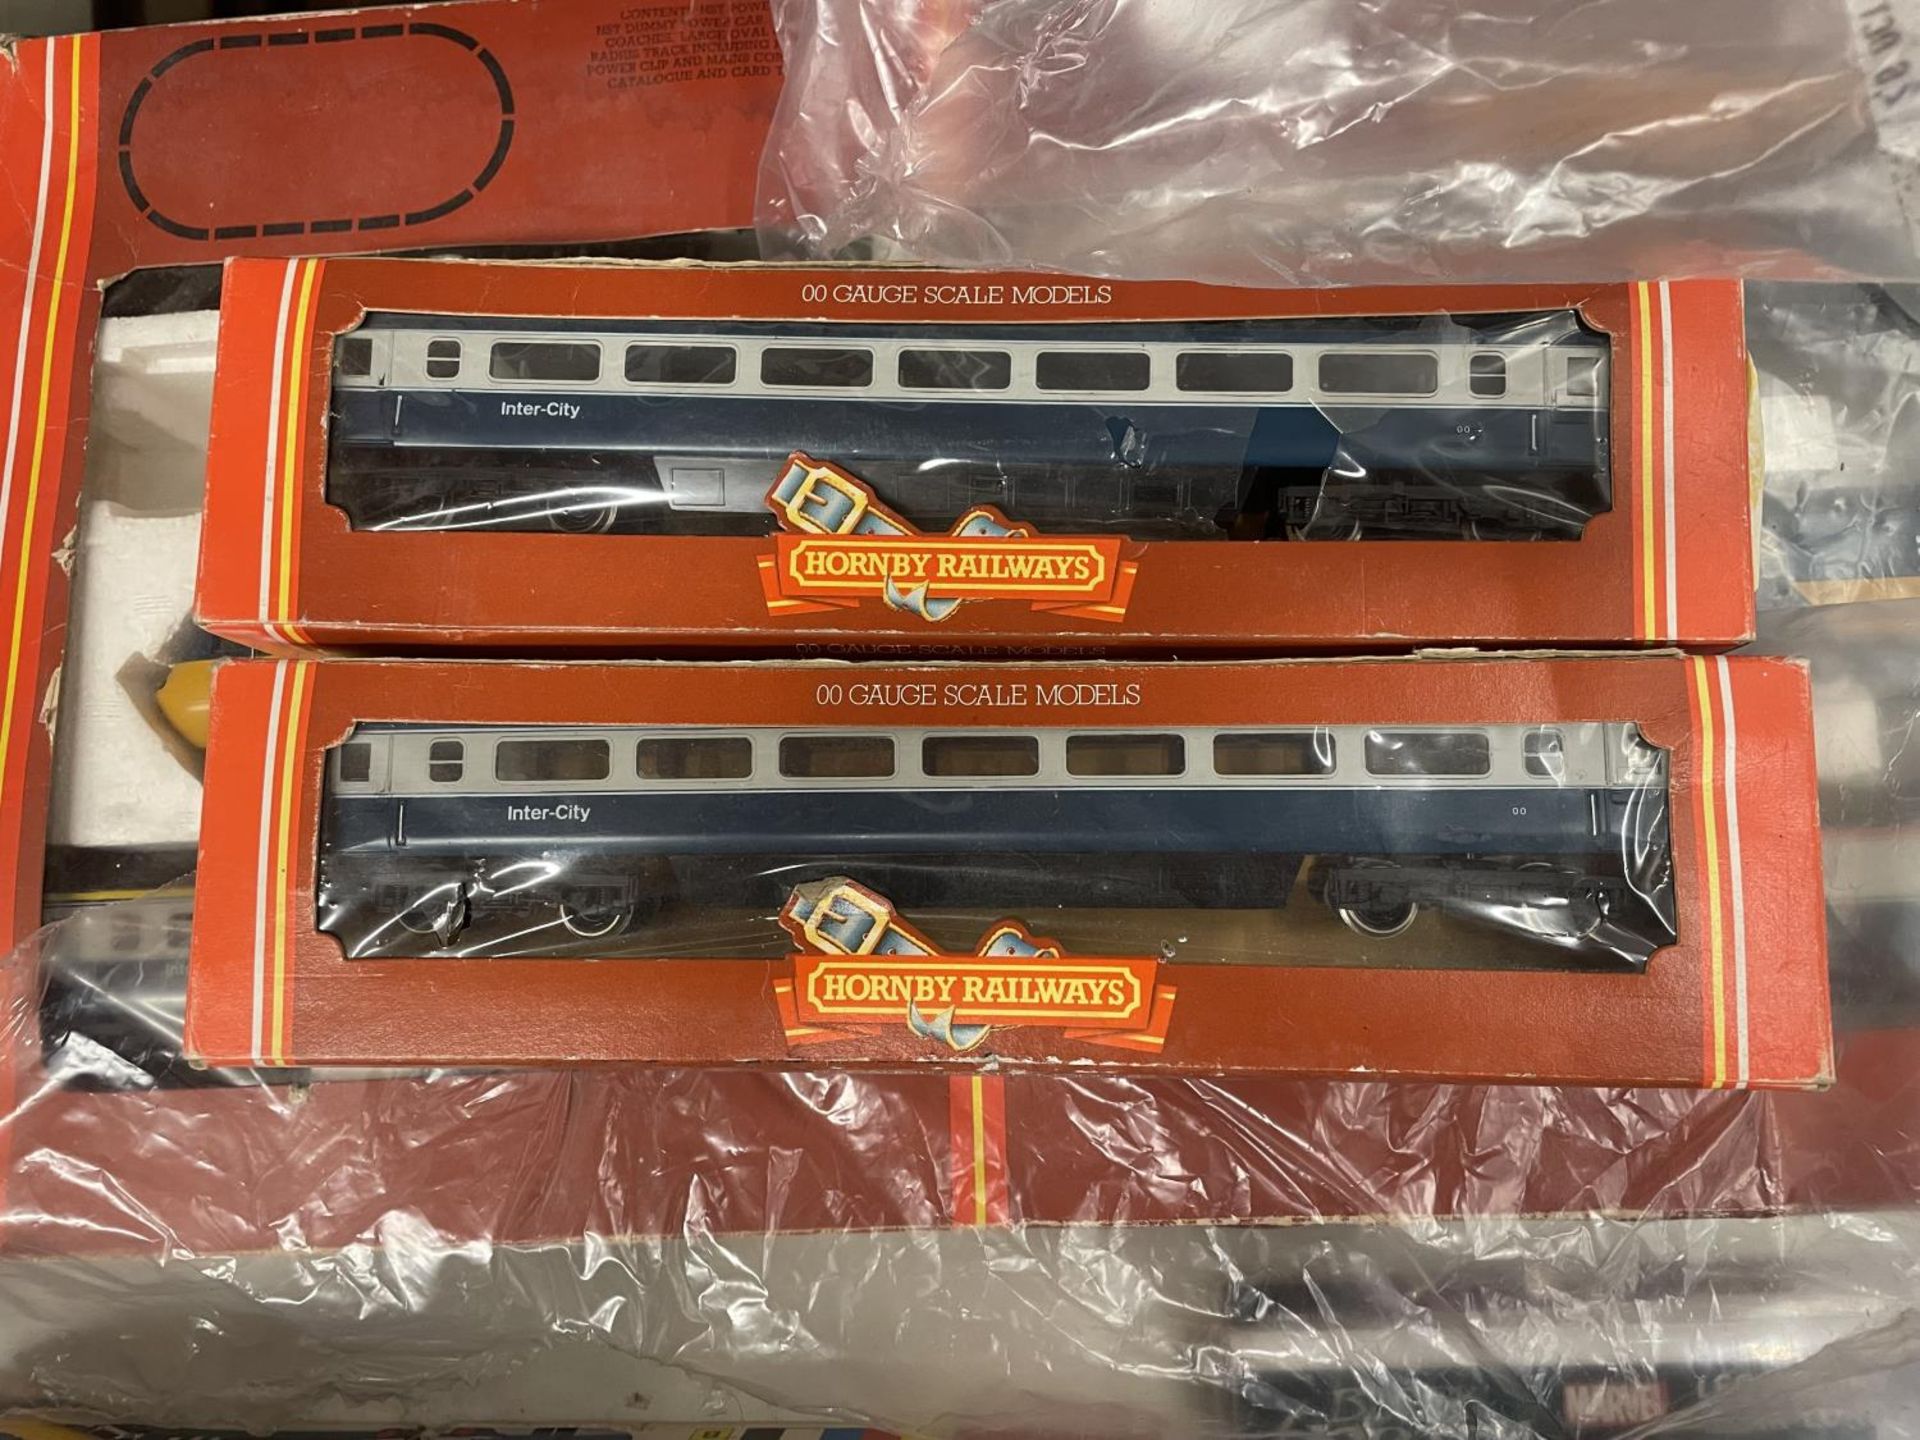 A BOXED HORNBY RAILWAYS INTER-CITY 125 SET PLUS TWO ADDITIONAL BOXED COACHES - Image 3 of 3